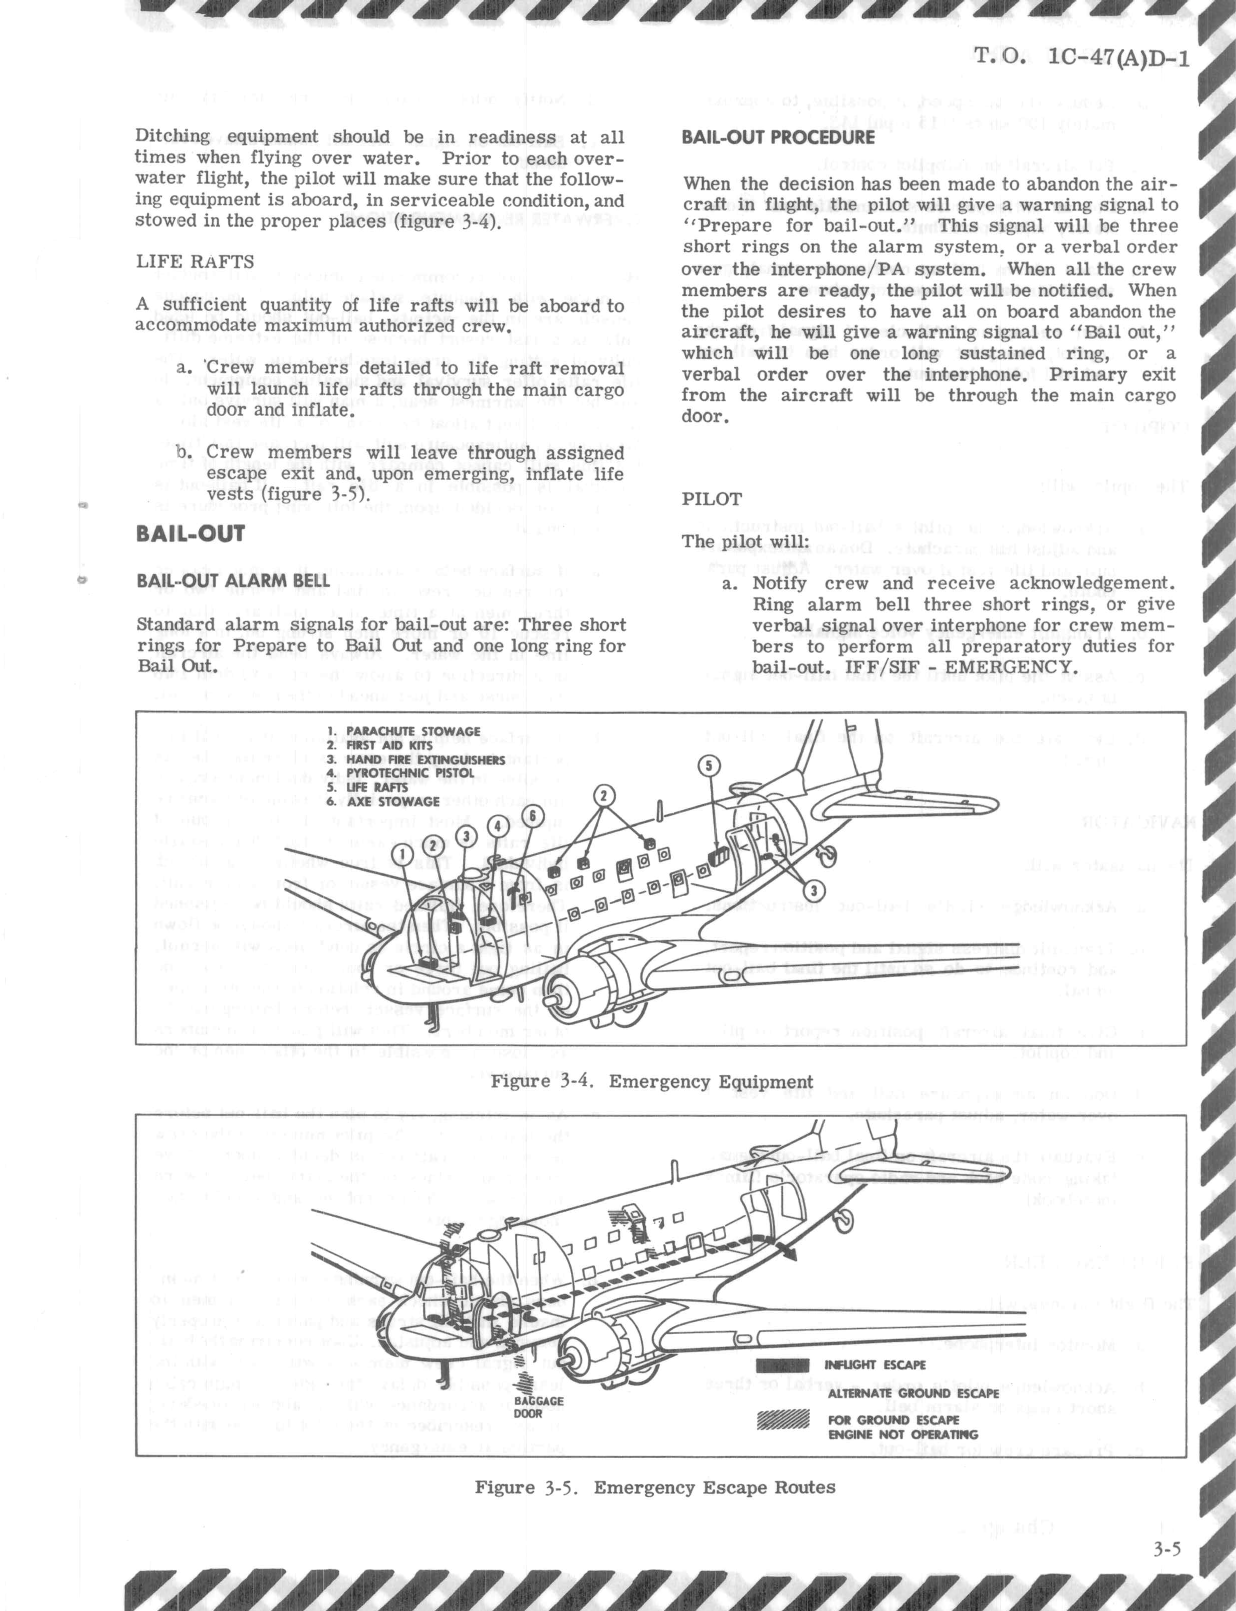 Sample page 13 from AirCorps Library document: Partial Flight Manual for AC-47D Aircraft